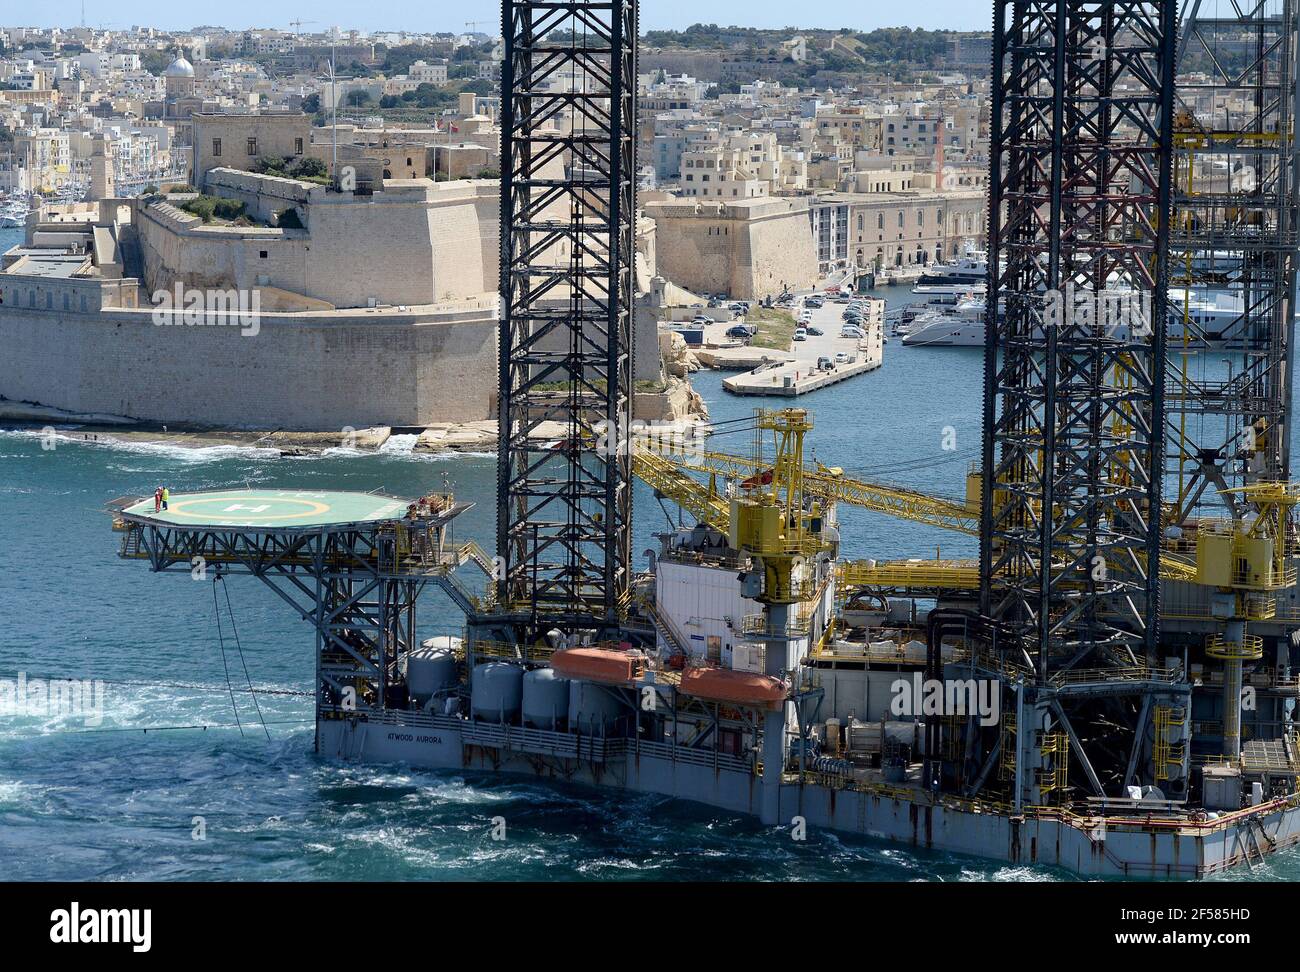 Valletta, Malta. 24th Mar, 2021. An oilrig is being removed from the Valletta Grand Harbour, Valletta, capital of Malta, on March 24, 2021. The oilrig named Atwood Aurora had been ruining the skyline of Valletta for several years. It is eventually removed following an agreement with the shipyard tasked with its maintenance. The removal follows that of another oilrig which was removed two weeks ago. Credit: Jonathan Borg/Xinhua/Alamy Live News Stock Photo